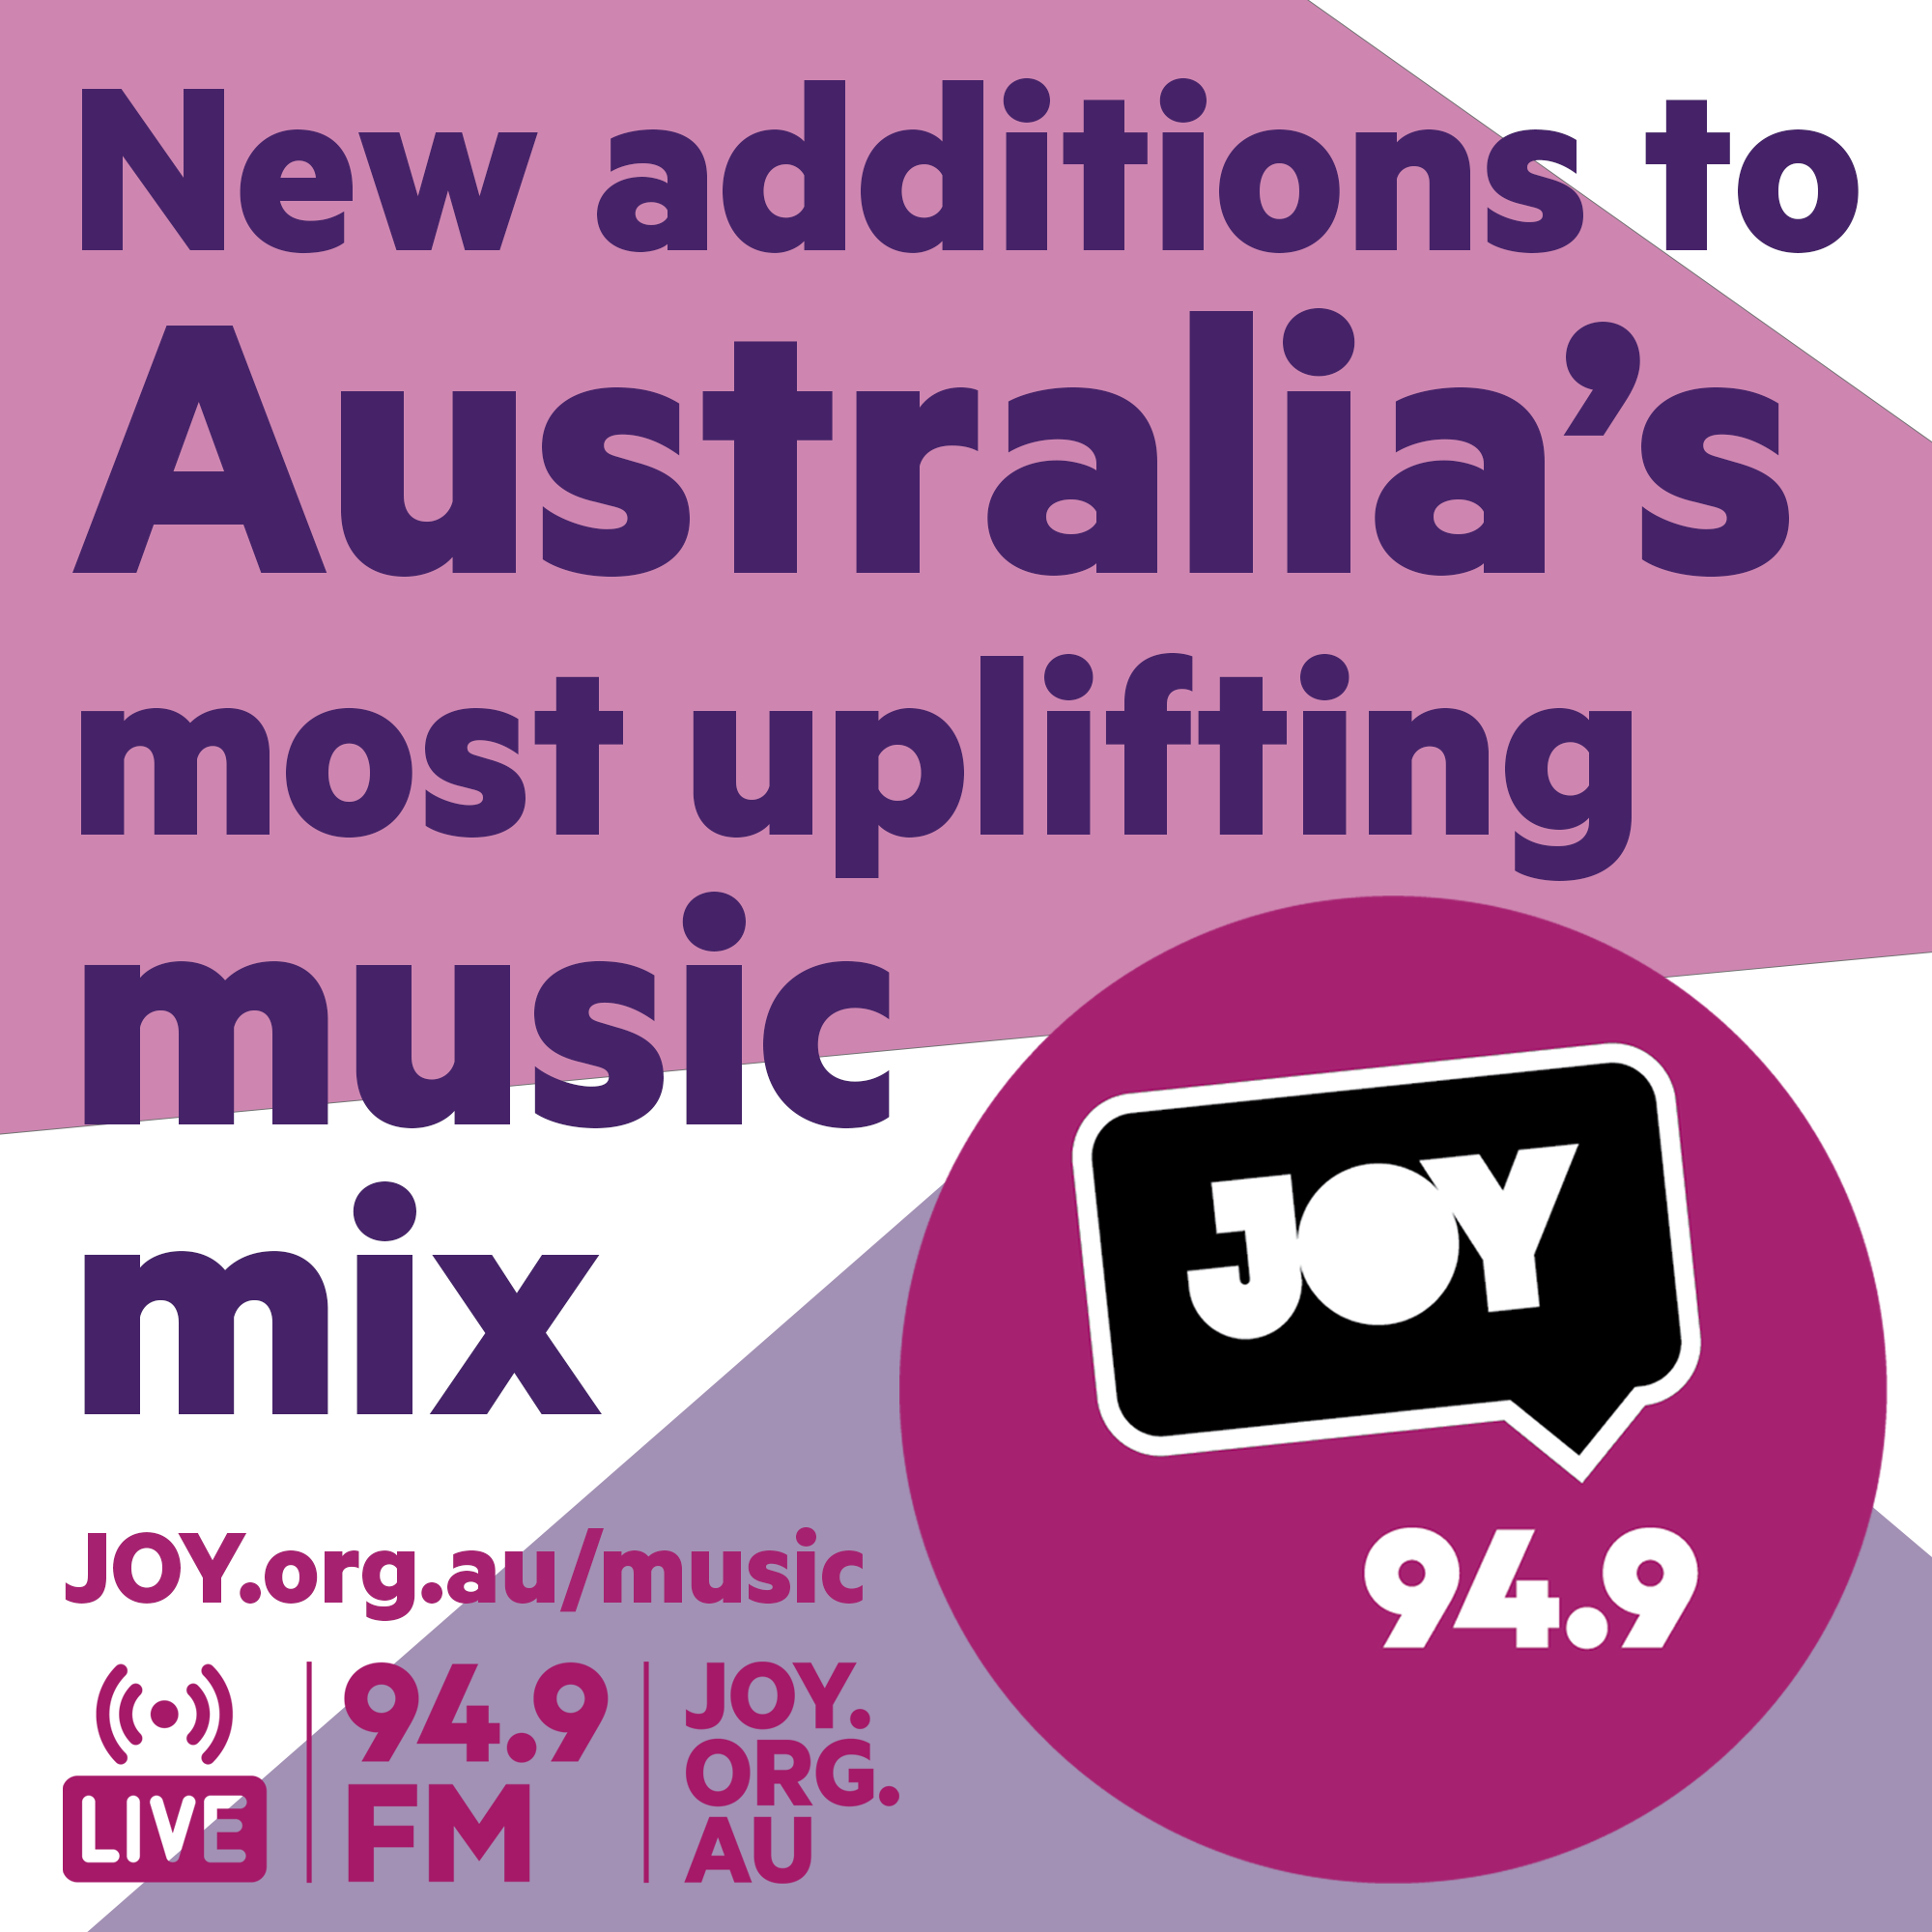 The newest songs to Australia’s most uplifting music mix: 25 May 2022